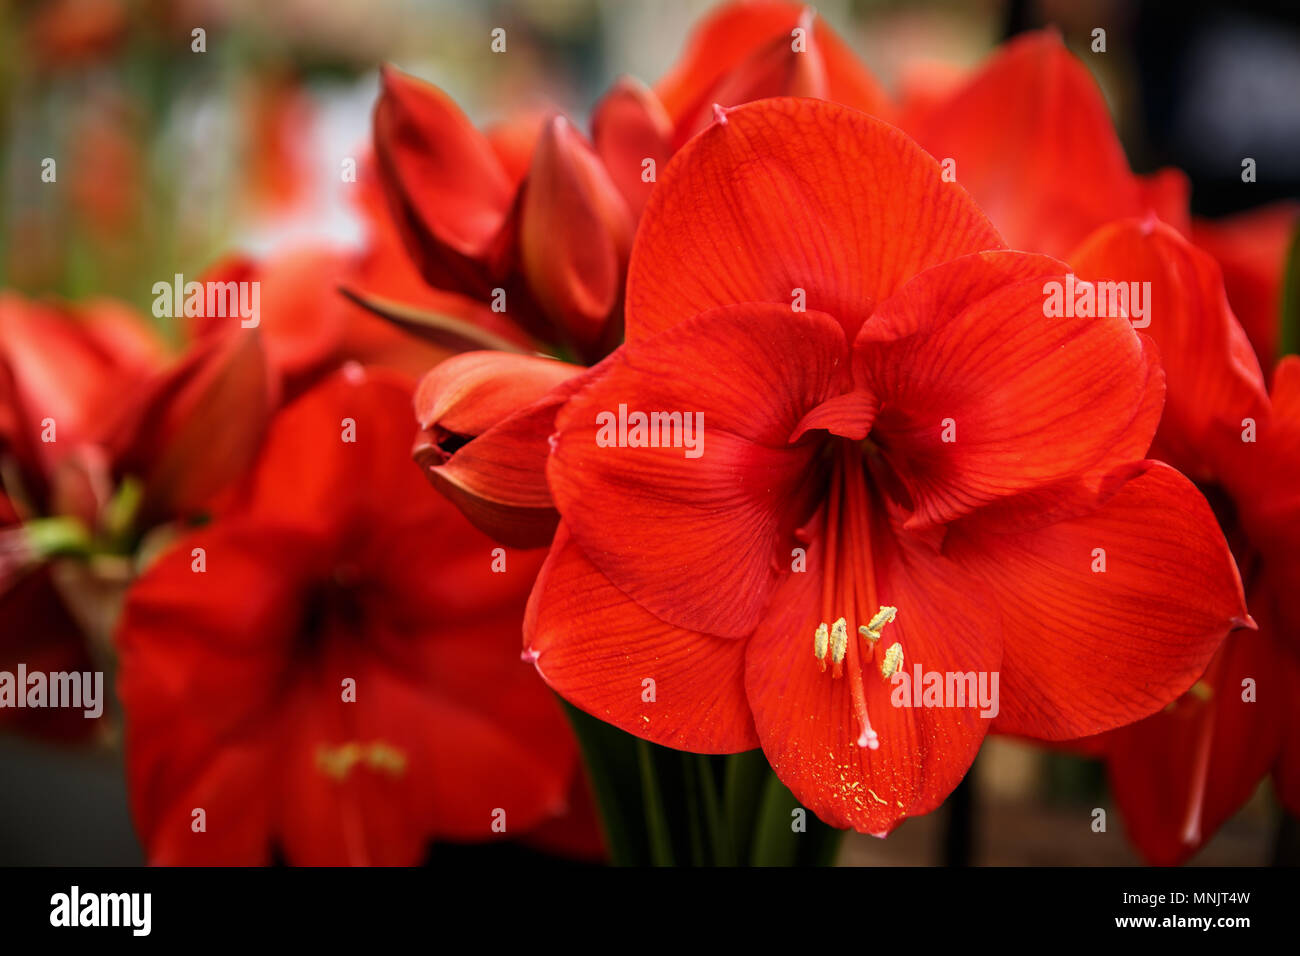 Beautiful colorful orange bugle lilies flowers bloom in spring garden.Decorative wallpaper with red watsonia flower blossom in springtime.Beauty of na Stock Photo